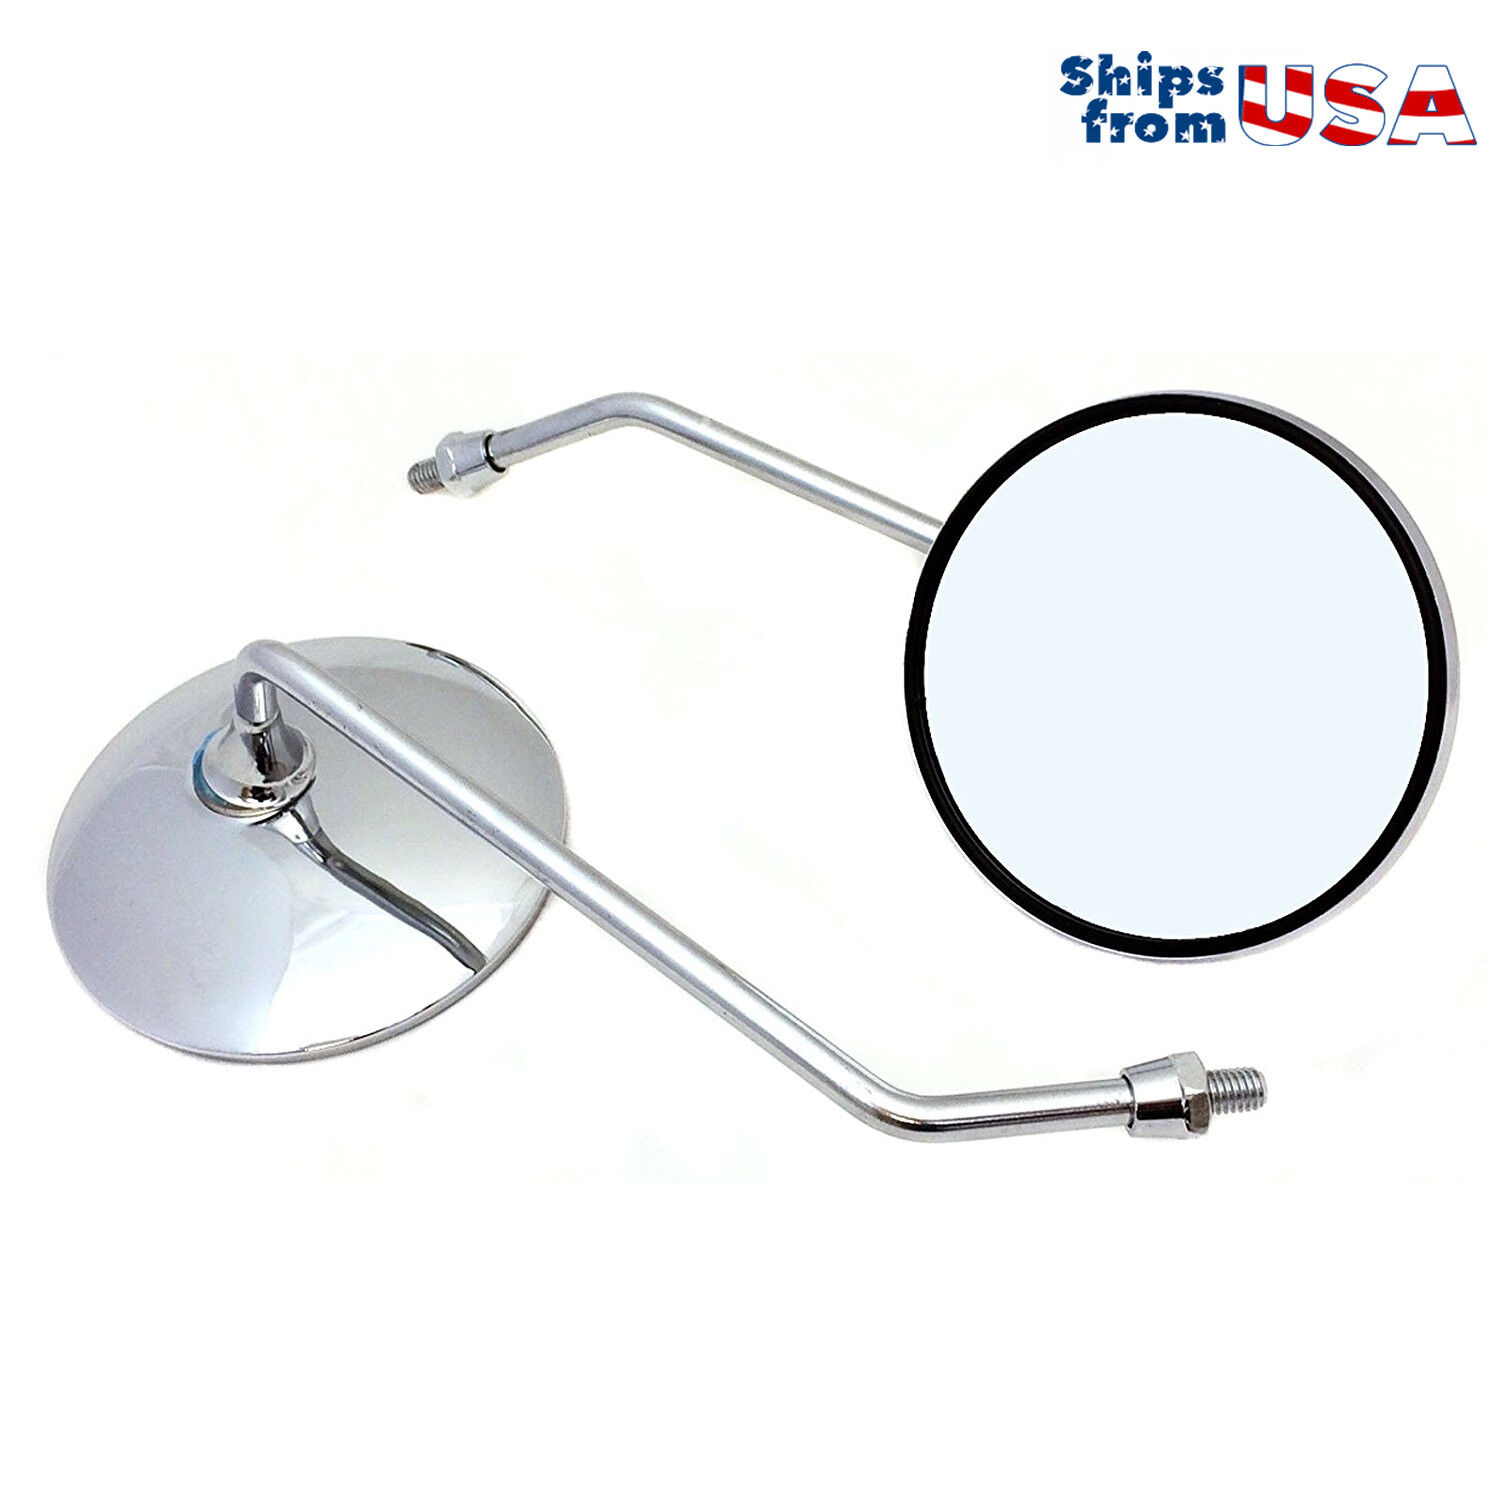 Motorcycle Rearview Mirror Set 8mm Chrome Round Shape - Classic Style